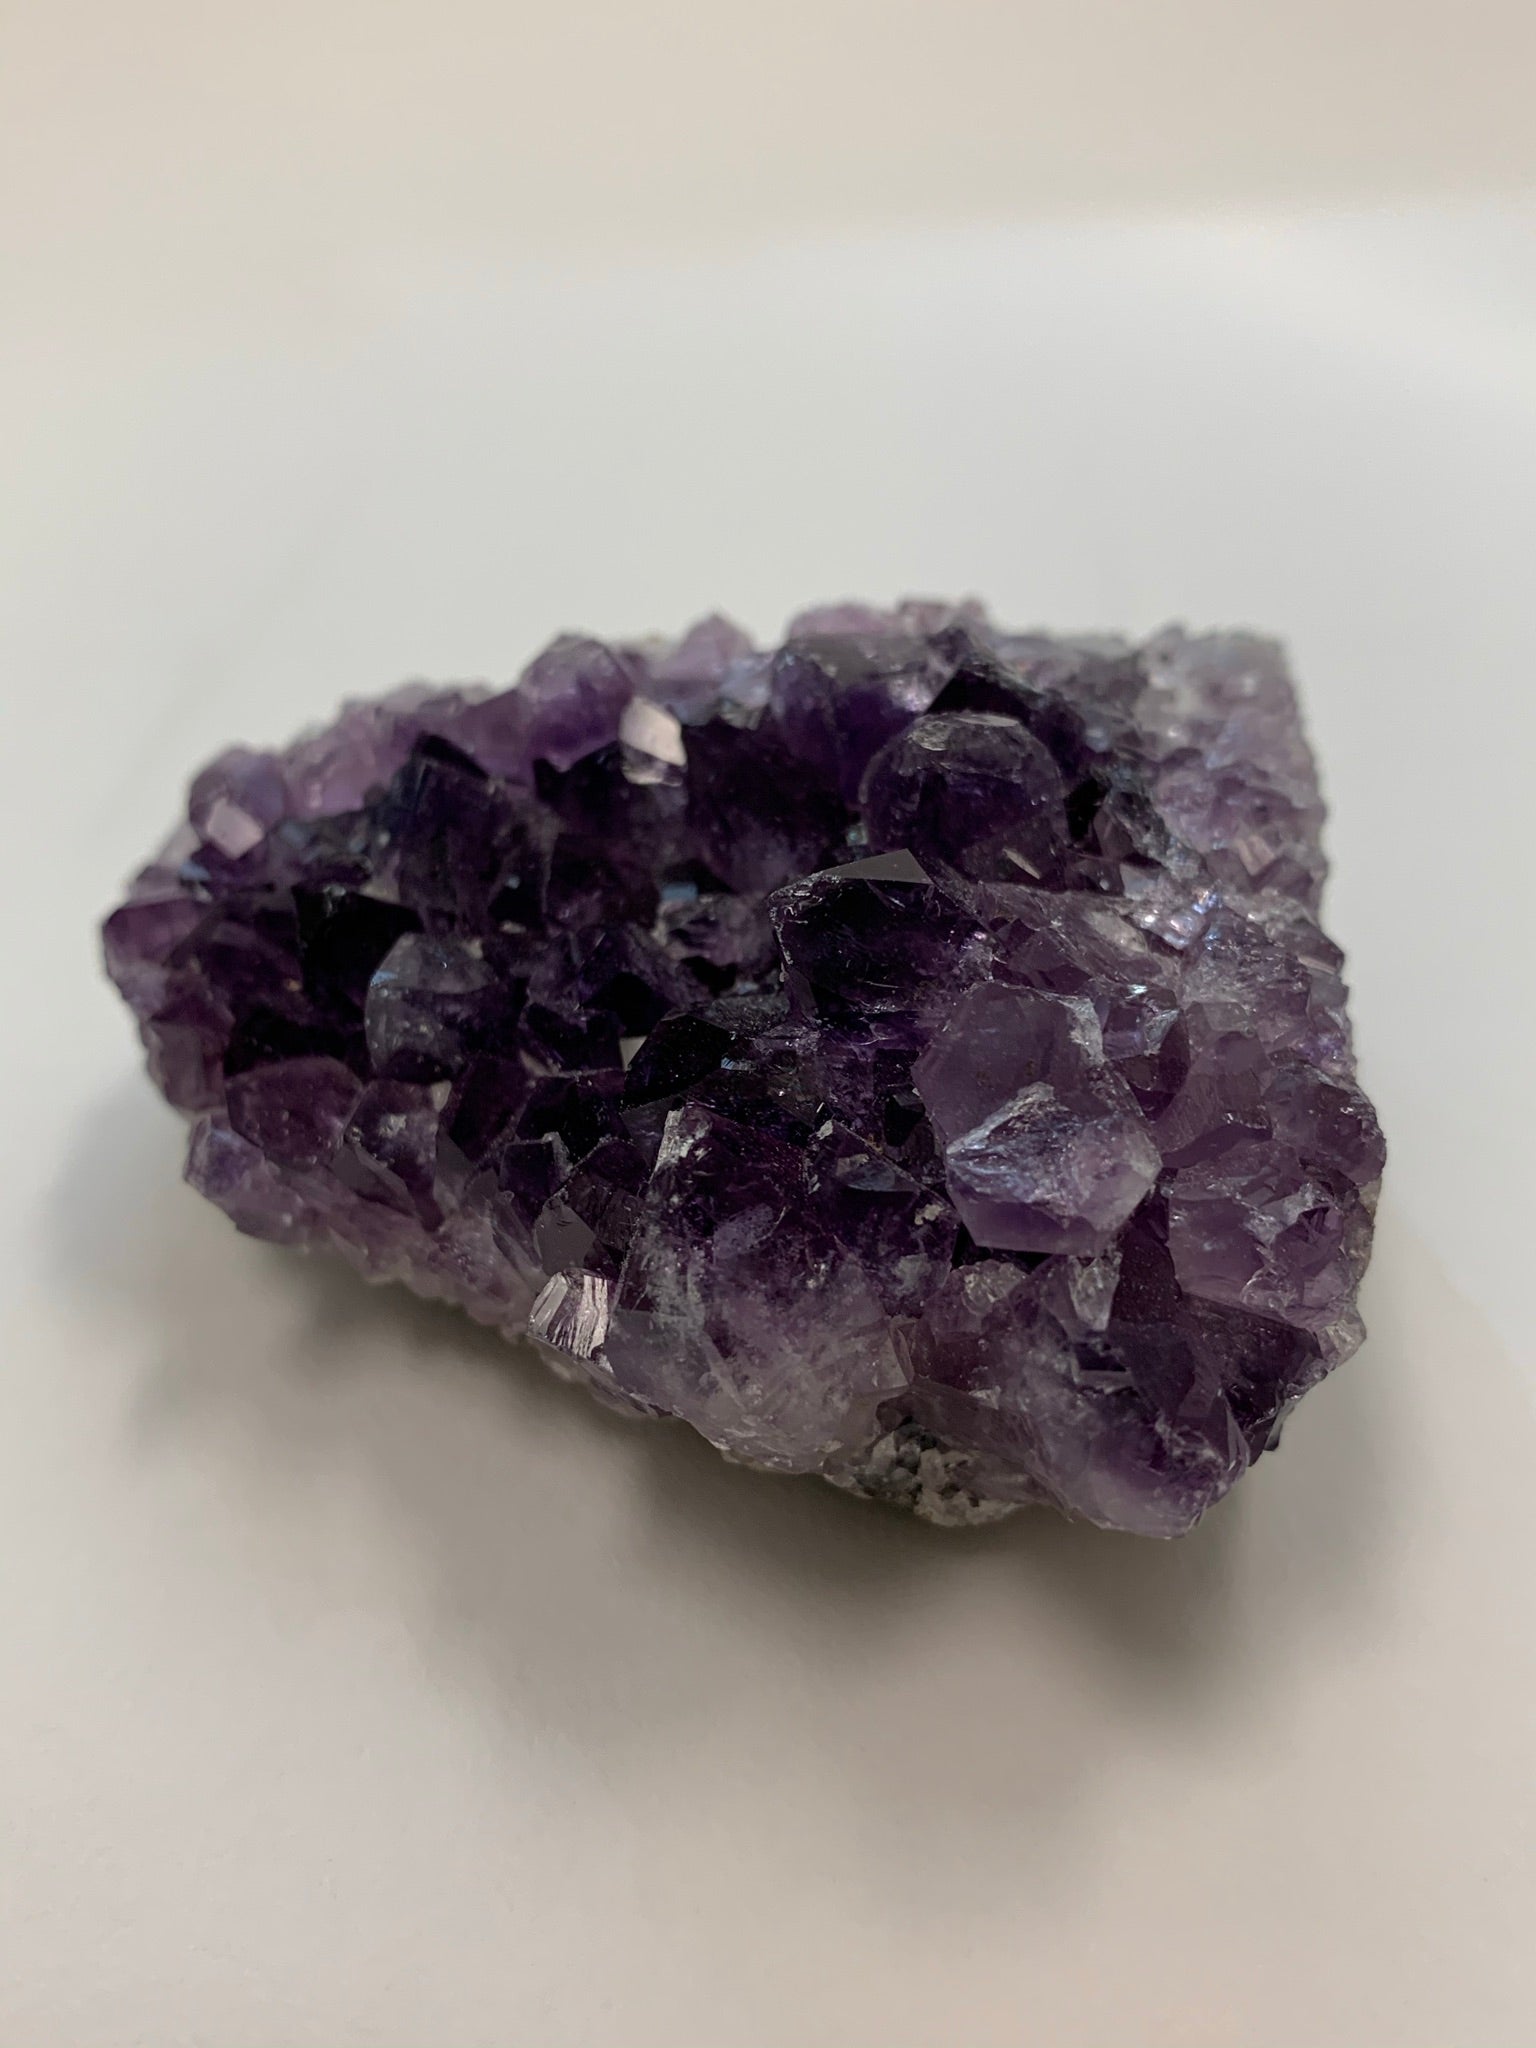 Close-up view of a different shape of the amethyst geode piece - great quality and color. Size varies, but the average weight is 4.4oz. Each piece is unique in shape.